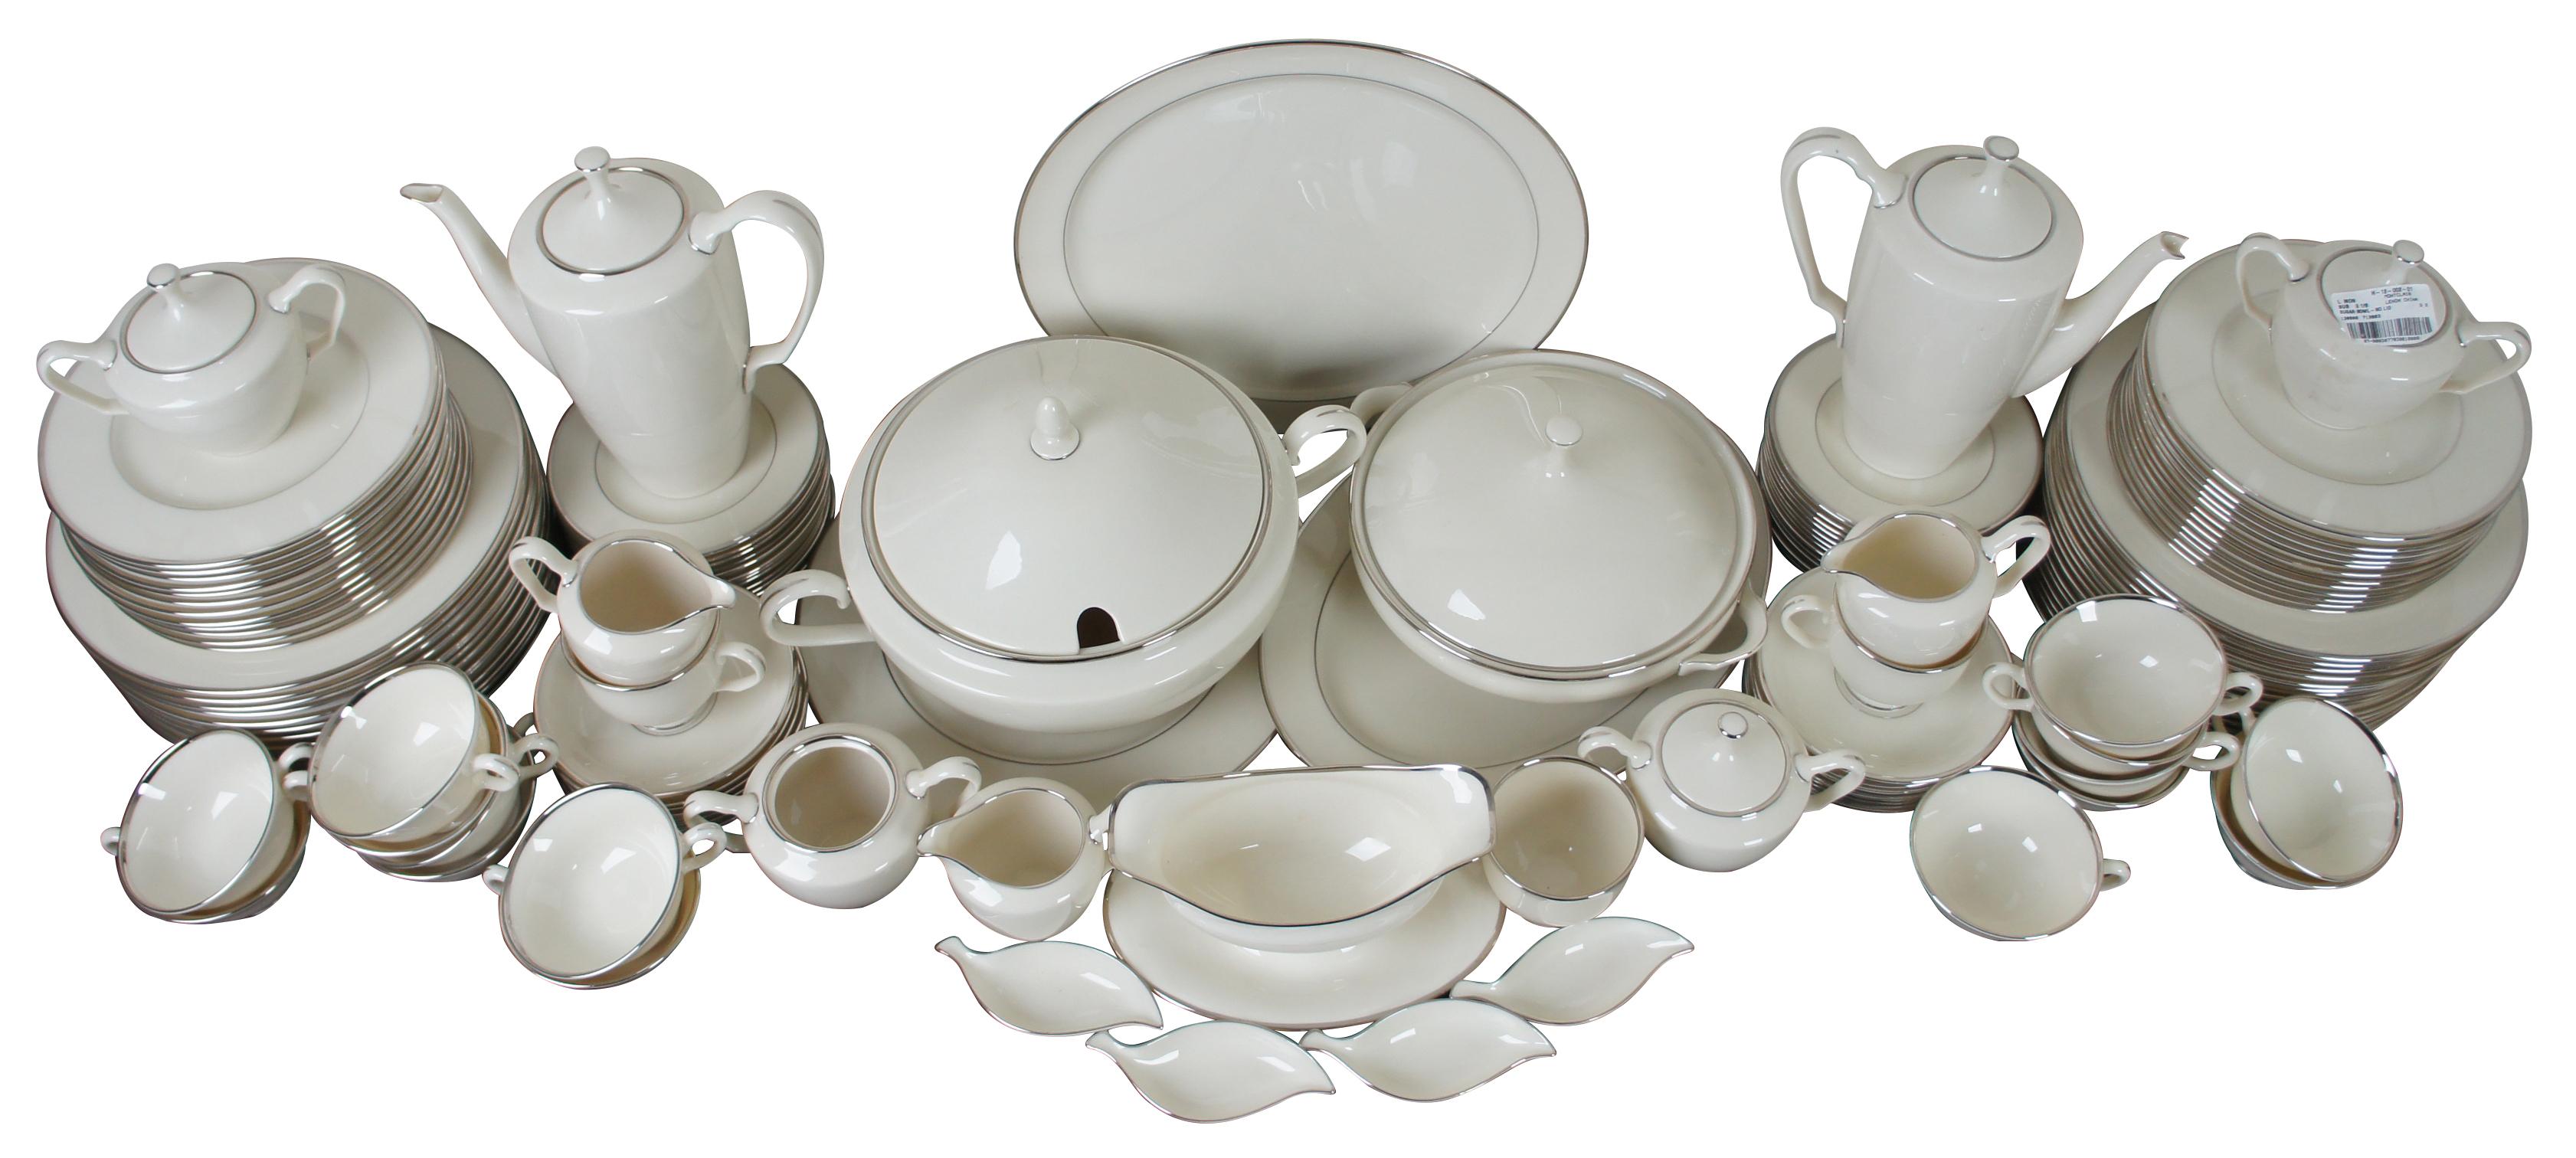 136-piece Lot Lenox Presidential collection Montclair China platinum dinner service

Beautiful and large set of china, great for parties and events!

Measures: Large round platter 12.75” x 0.75”, medium round platter 12.125” x 0.75” / Soup